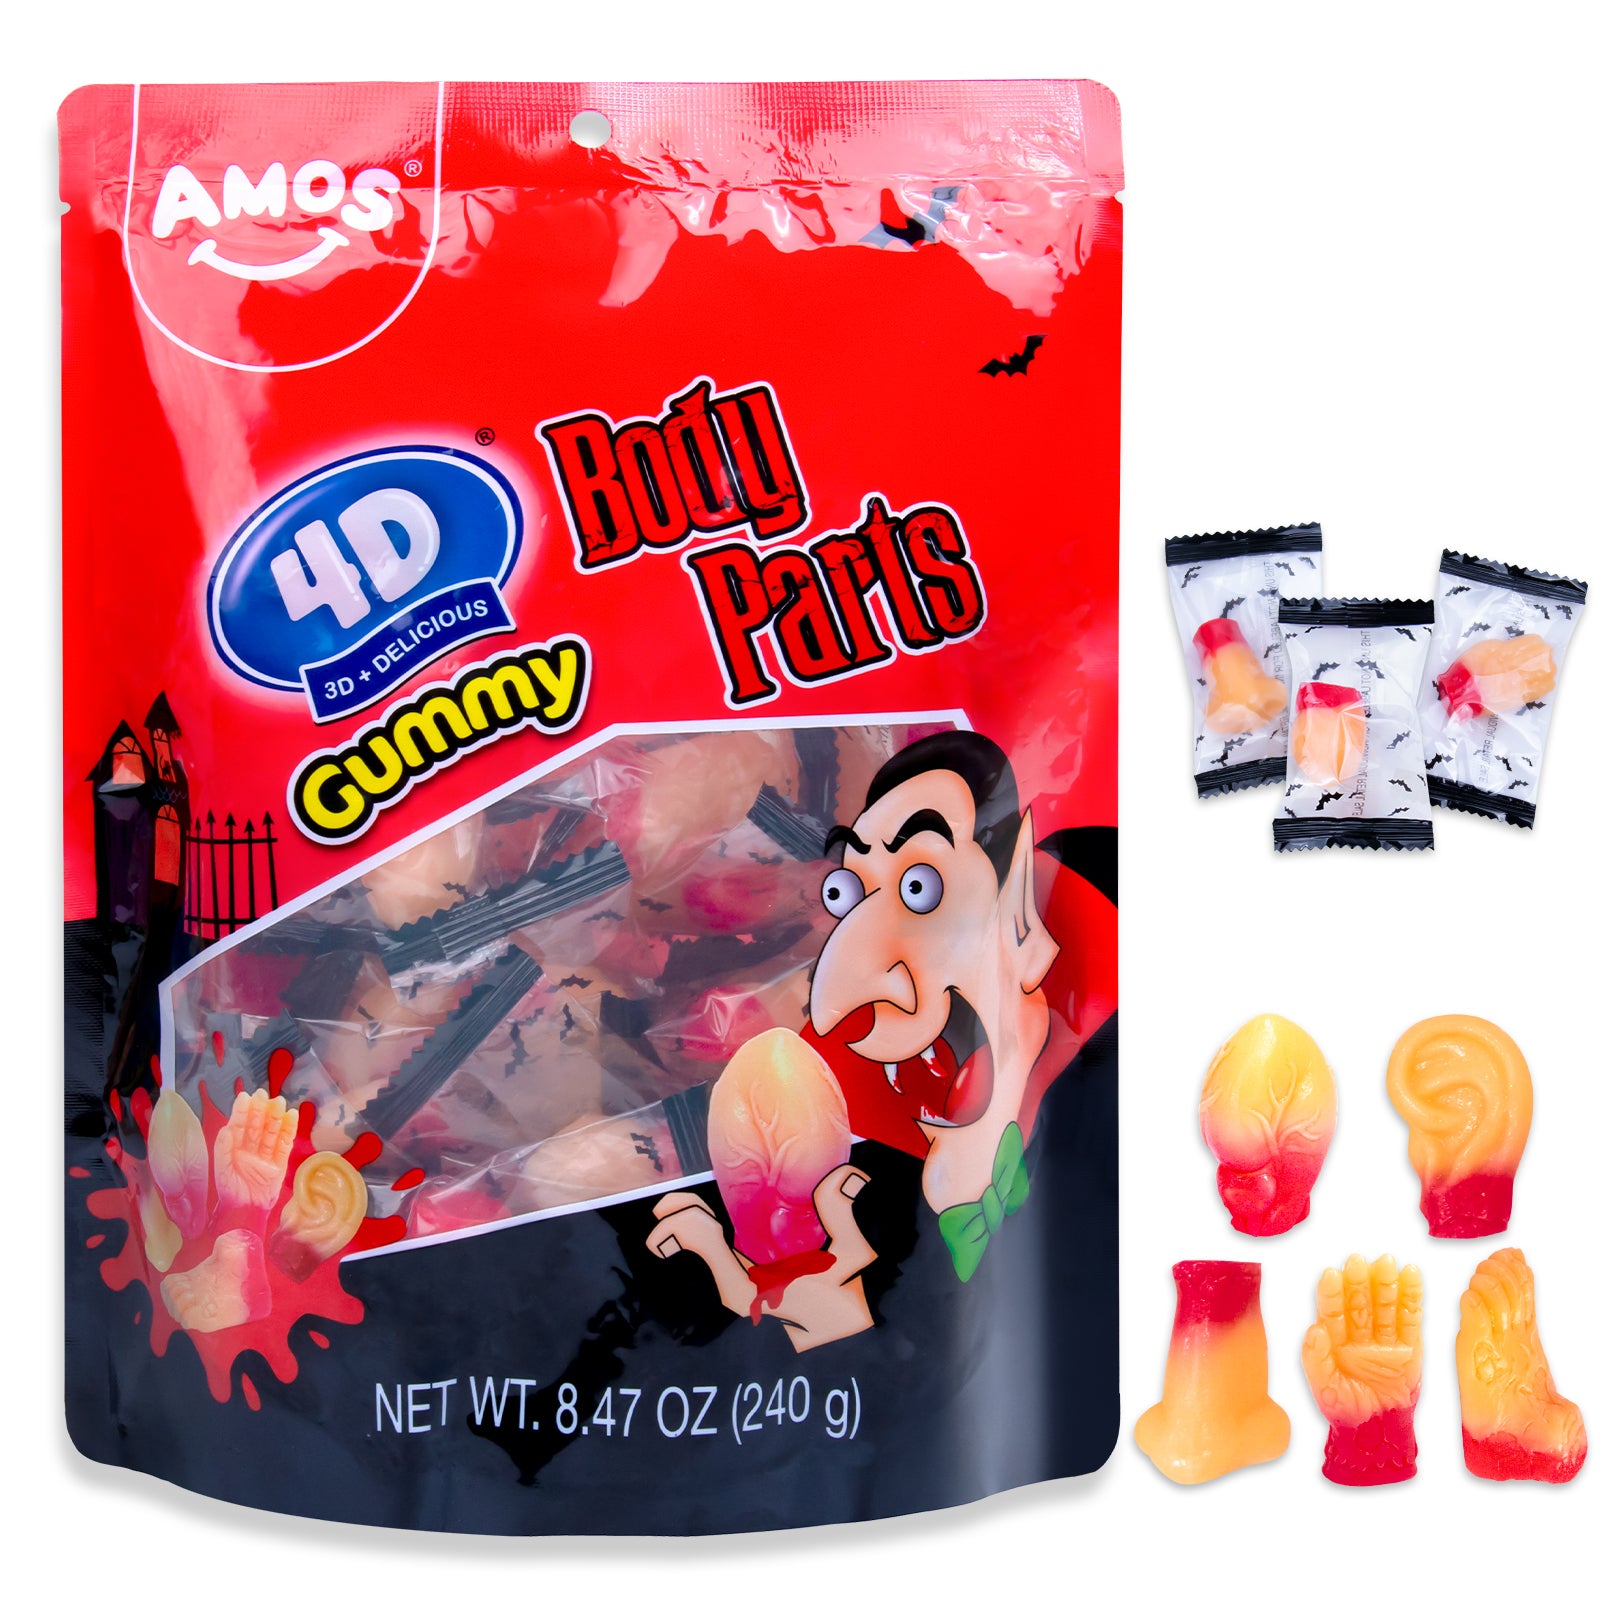 Halloween Candy - 4D Body Parts Gummy